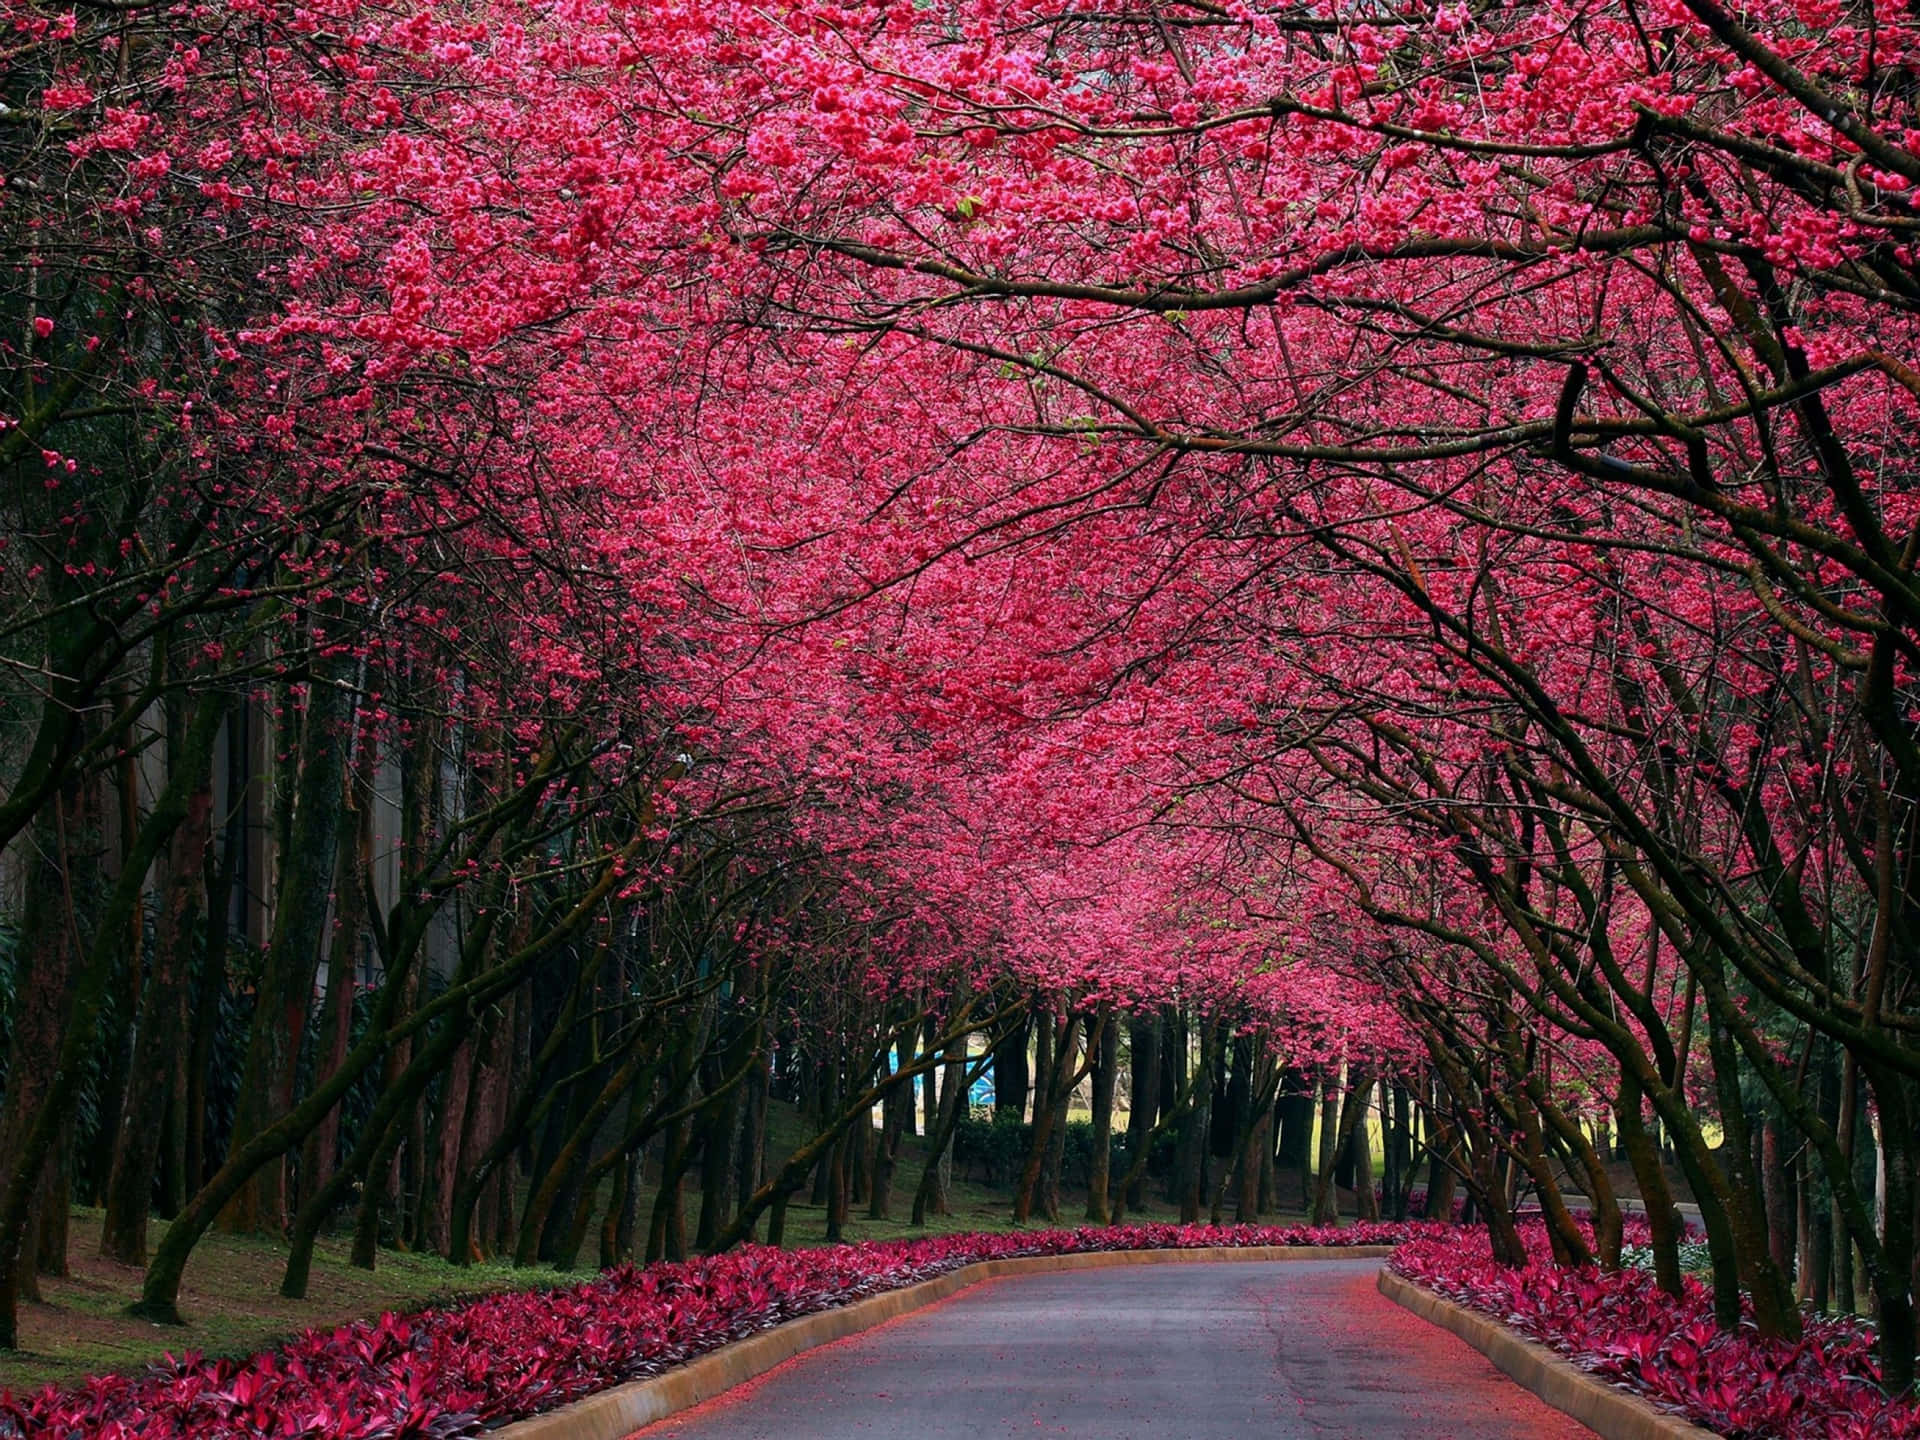 A Road Lined With Pink Flowers